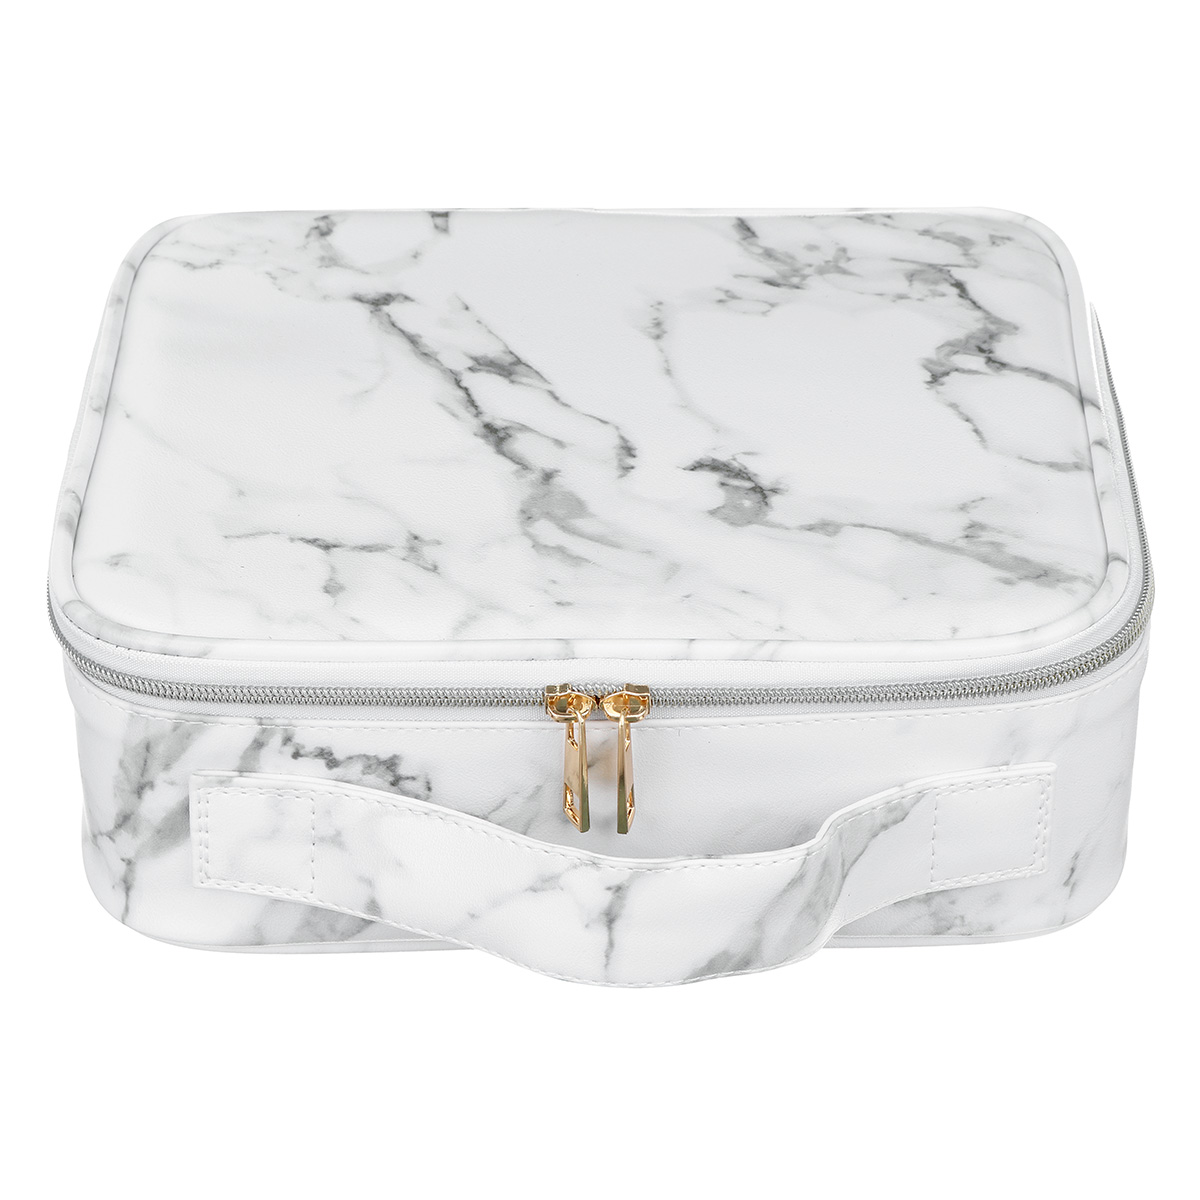 Portable-Large-Capacity-Multi-Grid-Cosmetic-Make-Up-Nail-Toiletry-Travel-Carry-Bag-Storage-Bag-Beaut-1859825-5